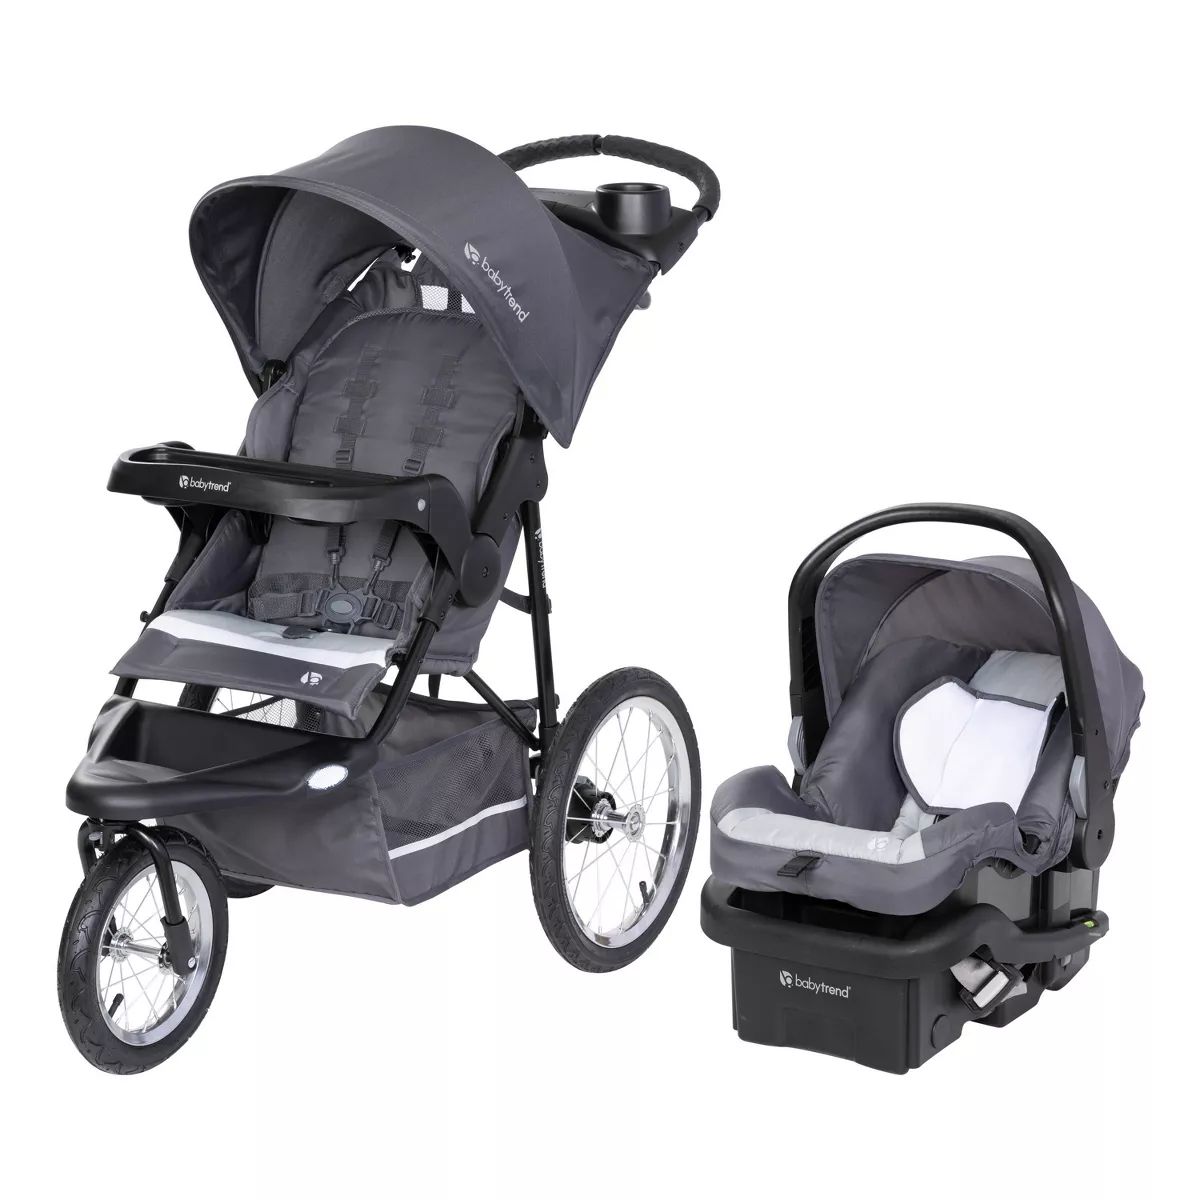 Baby Trend Expedition Jogger Travel System with EZ-Lift Infant Car Seat - Gray | Target